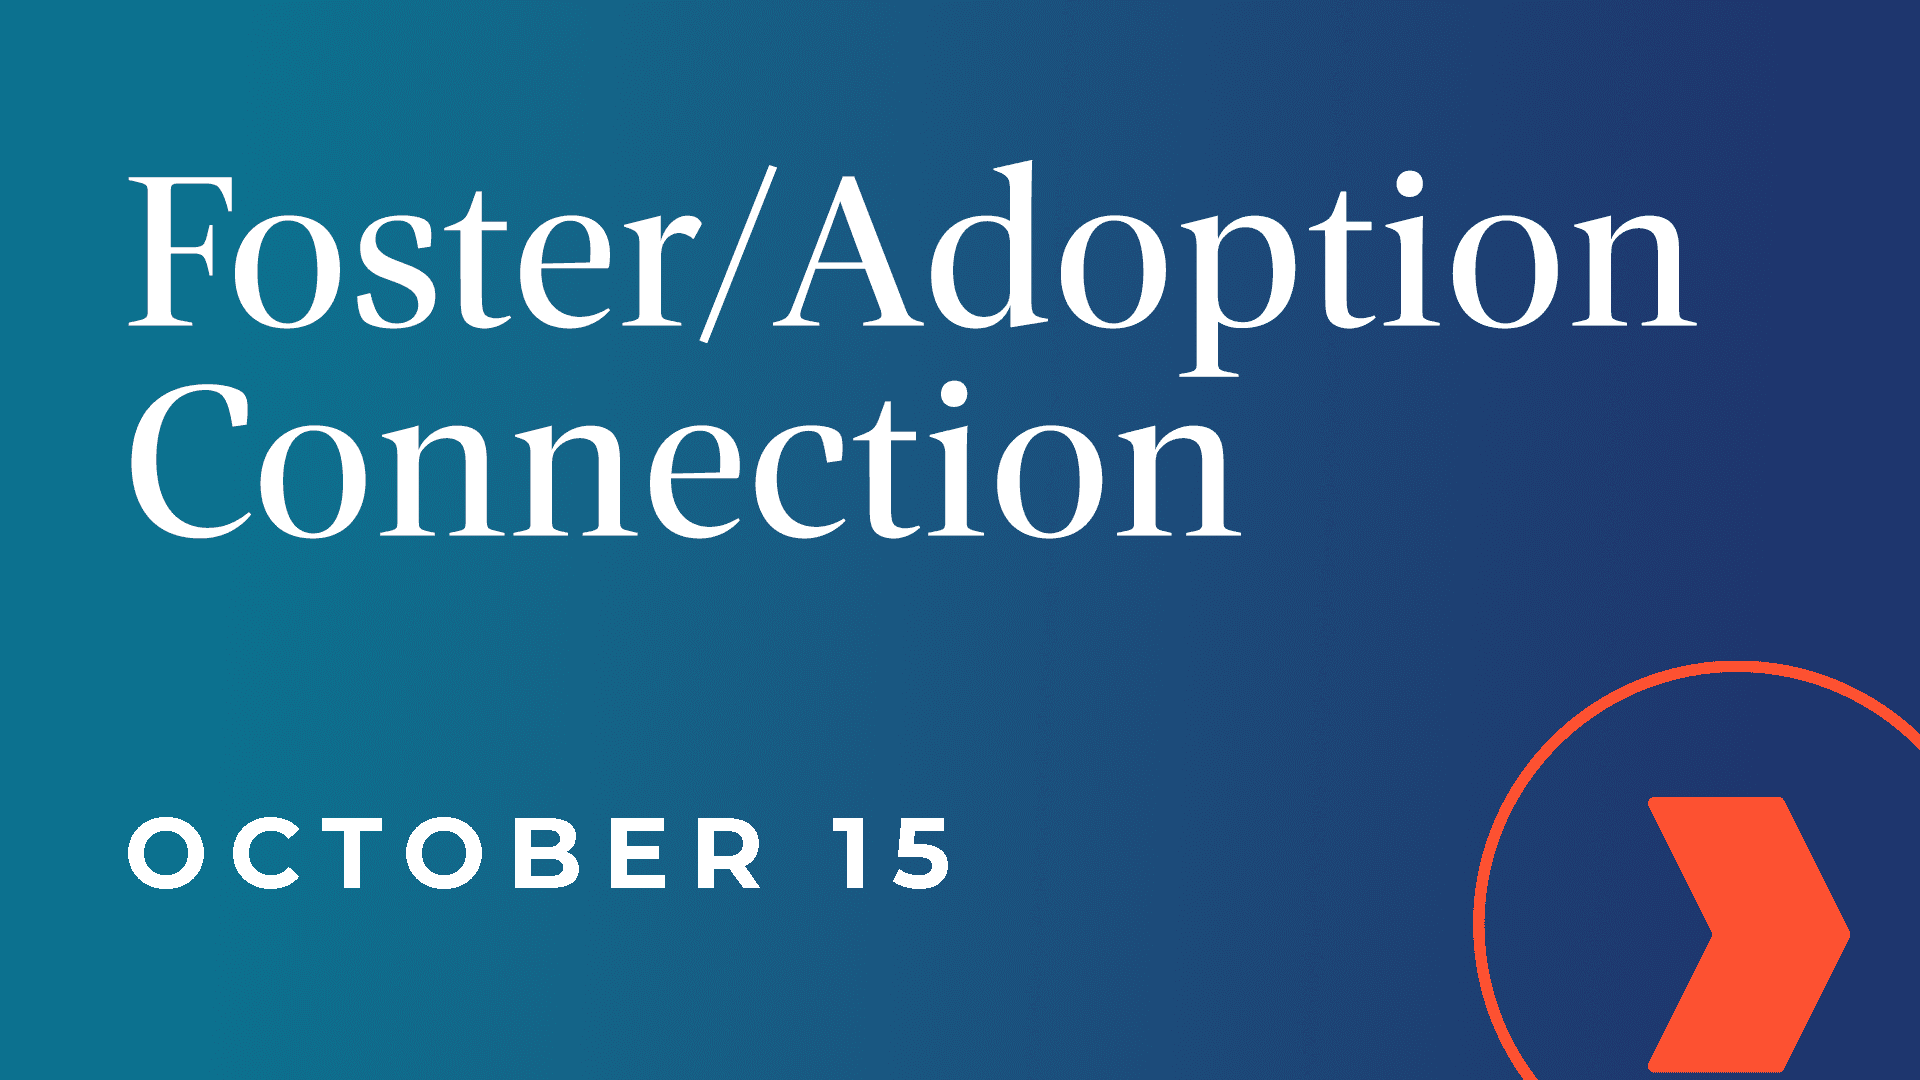 Foster Adoption Connection Gathering - Foster/Adoption Connection